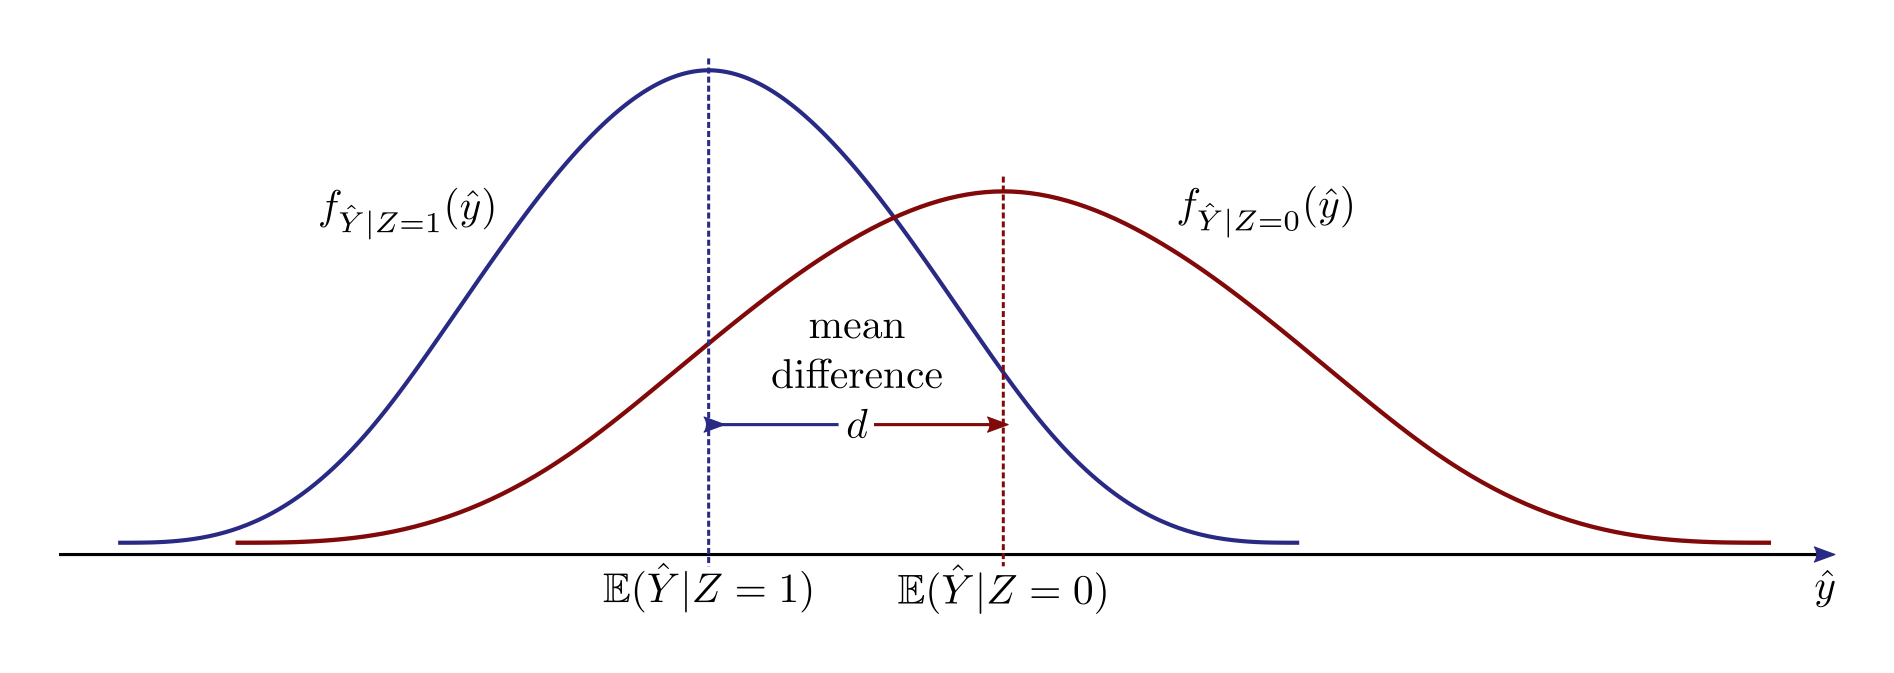 Figure 3.1: Visualisation of the mean difference for a continuous target variable.